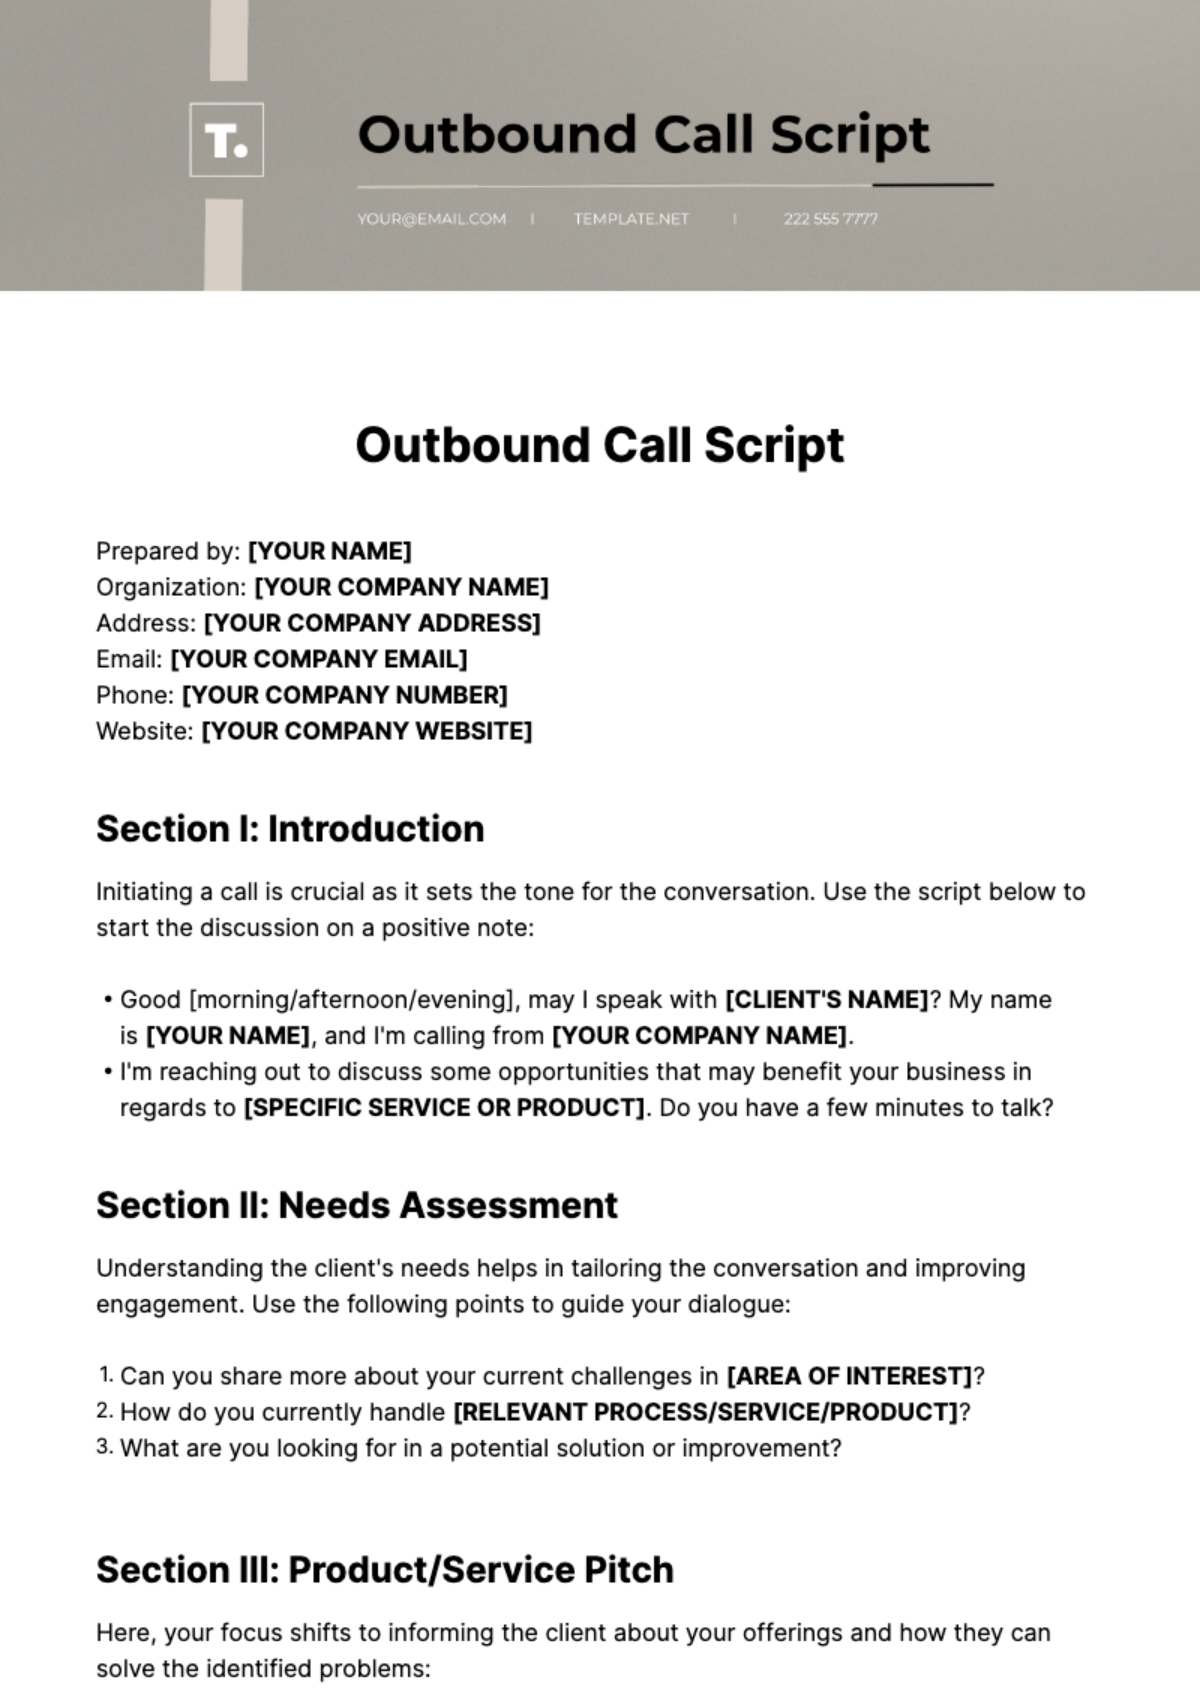 Outbound Call Script Template